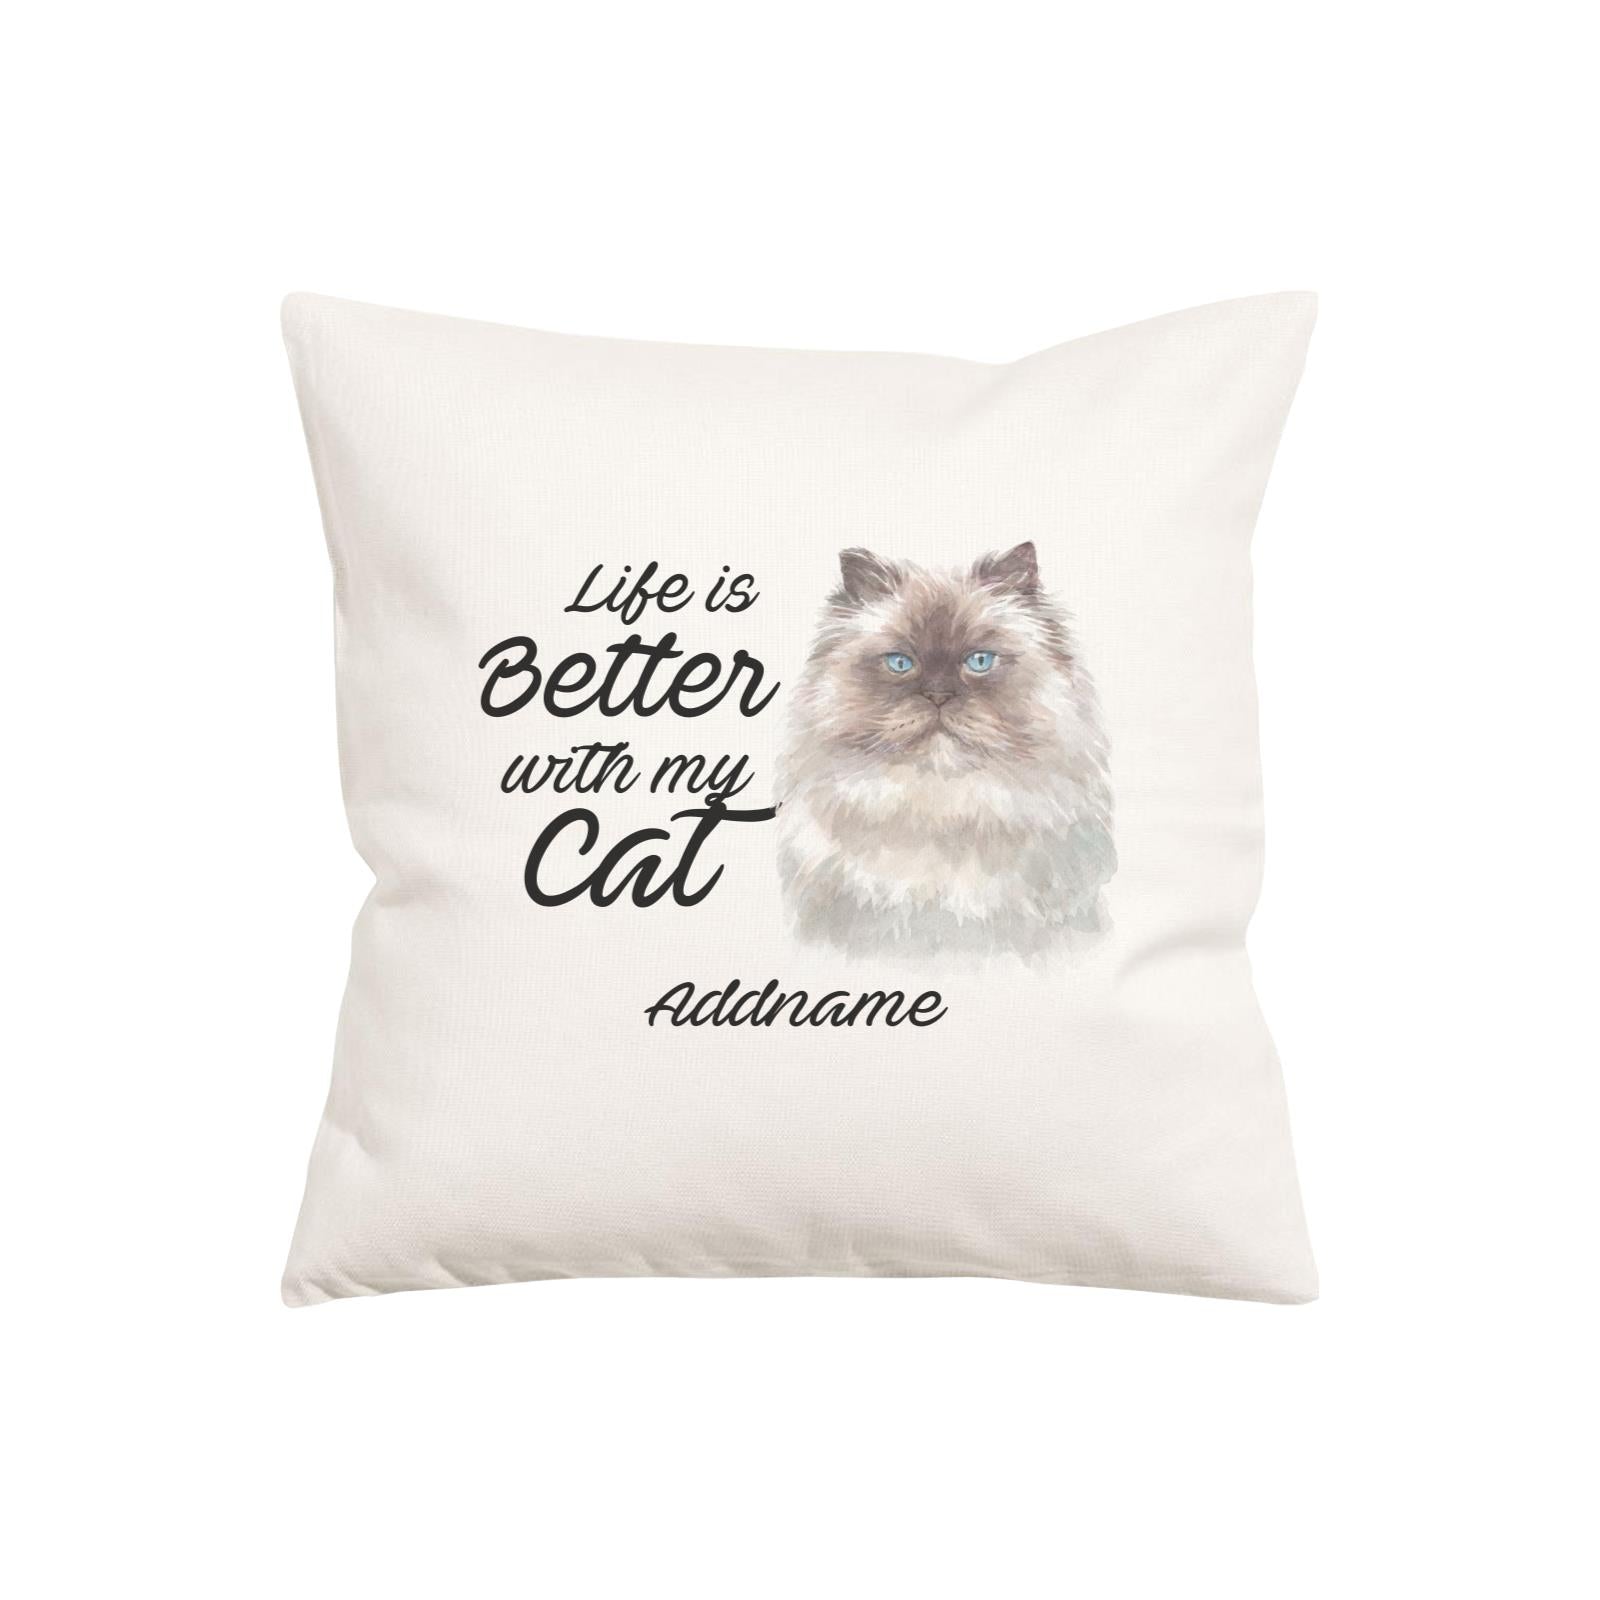 Watercolor Life is Better With My Cat Himalayan White Addname Pillow Cushion